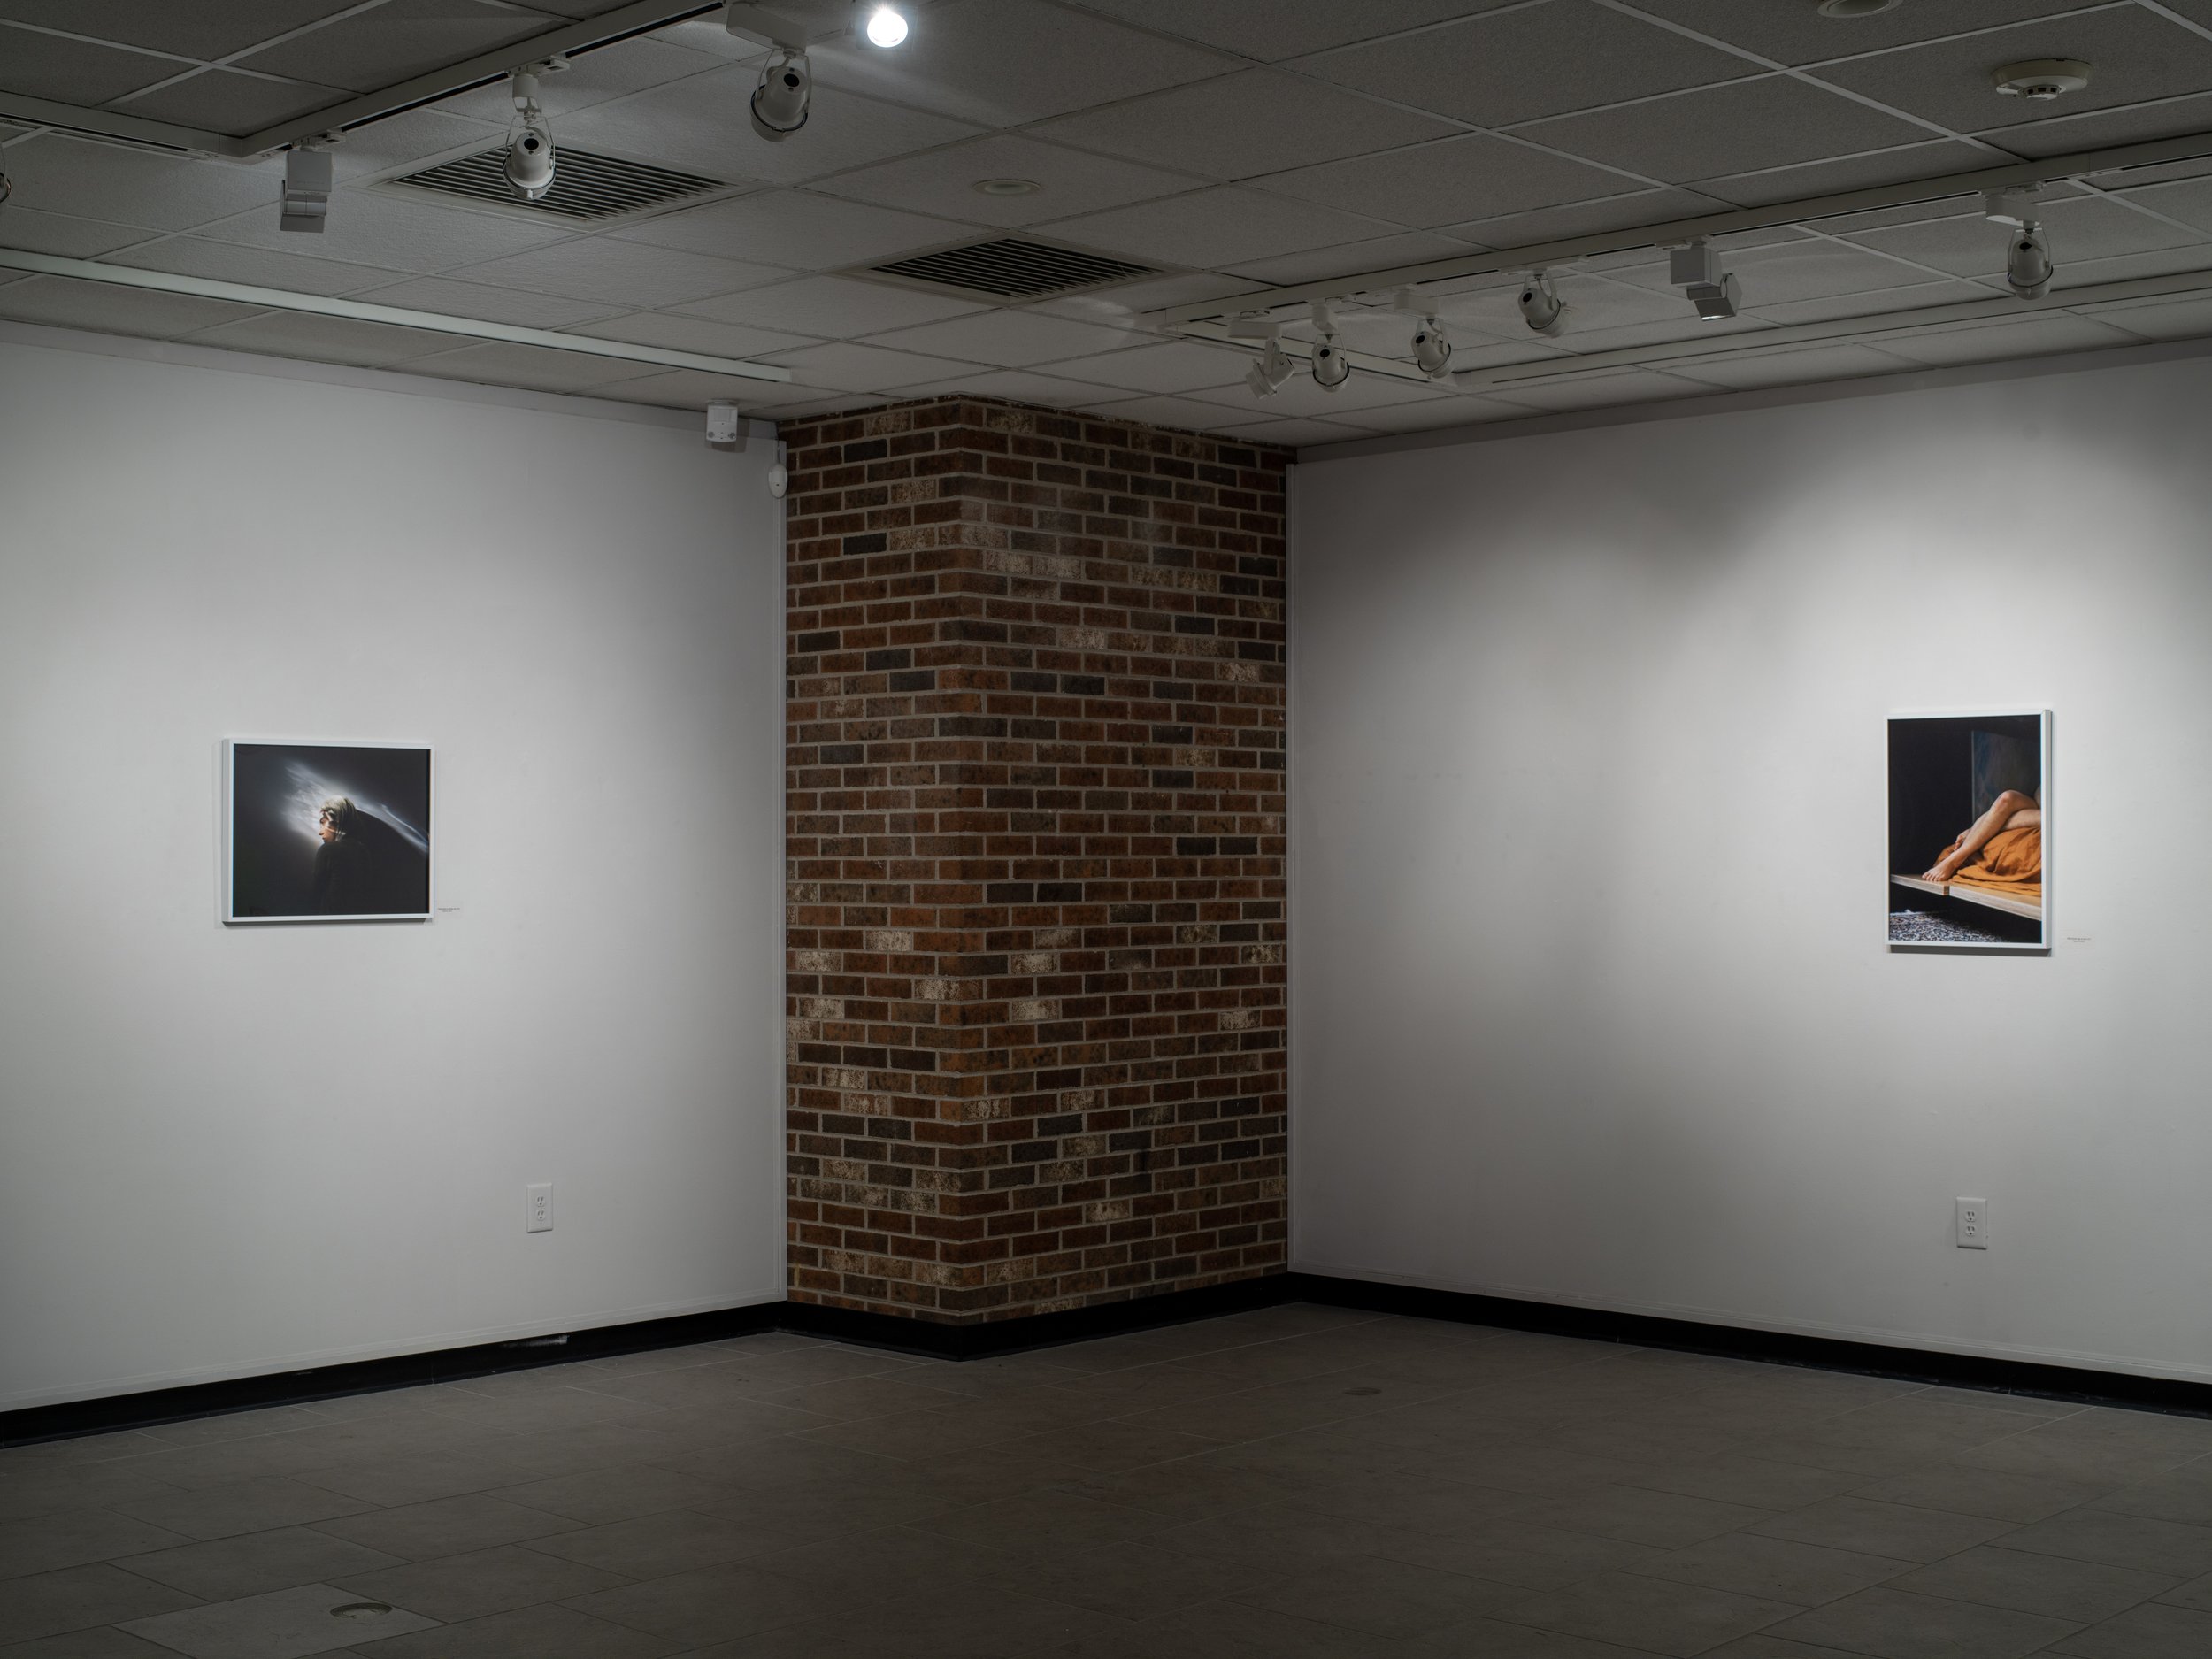   Love is not the last room  at the Alan Priebe Gallery at UW Oshkosh 